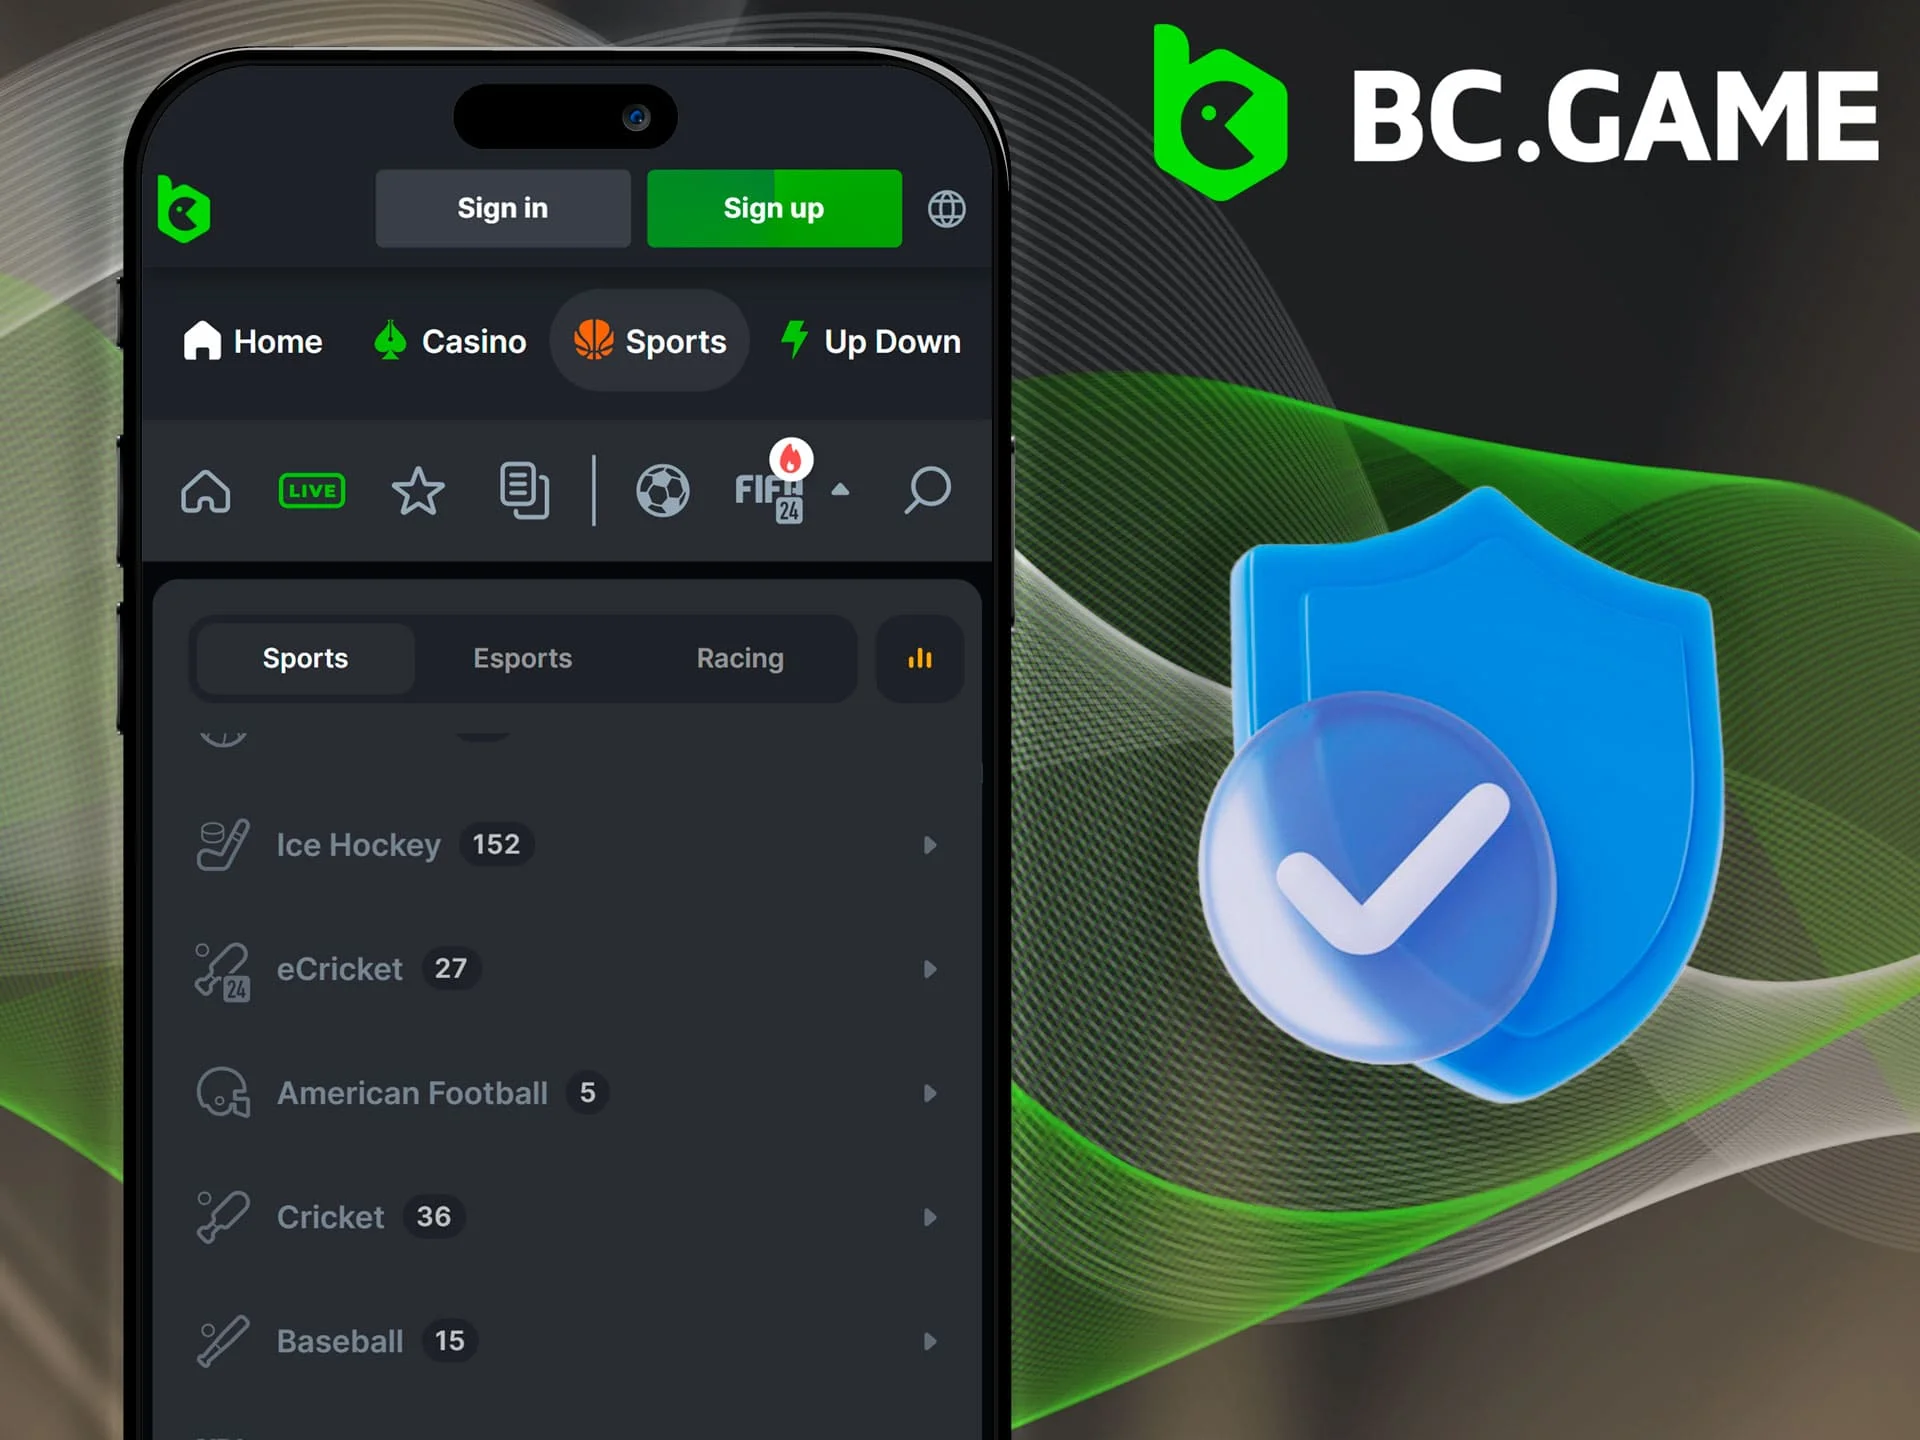 BC Game casino secures user data with two-factor authentication and SSL technology.